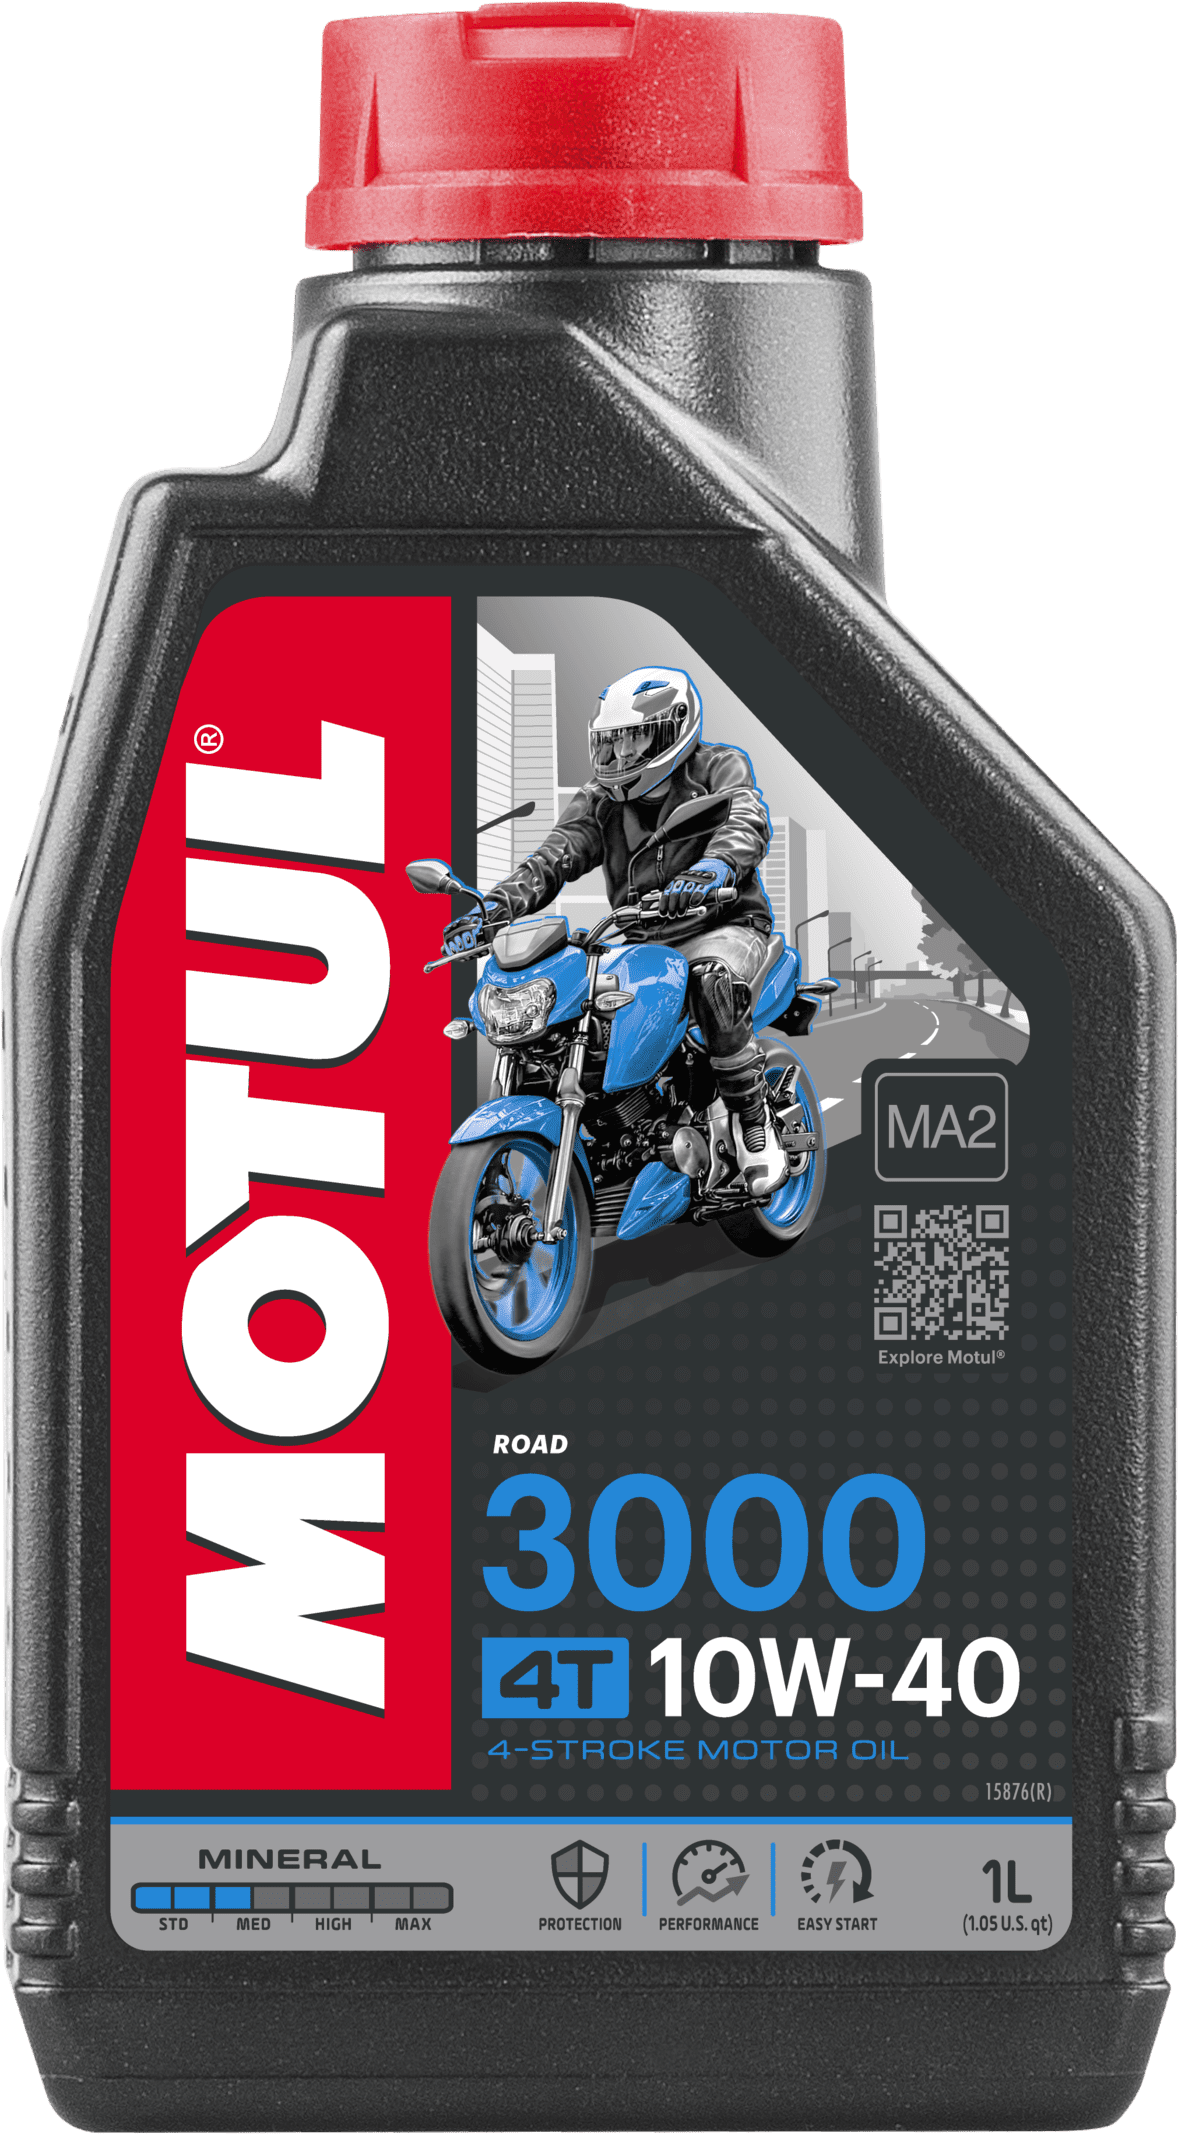 107672-1 Mineral engine lubricant. This product is specially designed for street & road bikes, trails, off-road bikes among others fitted with 4 Stroke engines with integrated gearbox or not and wet or dry clutch requiring API SL standards.